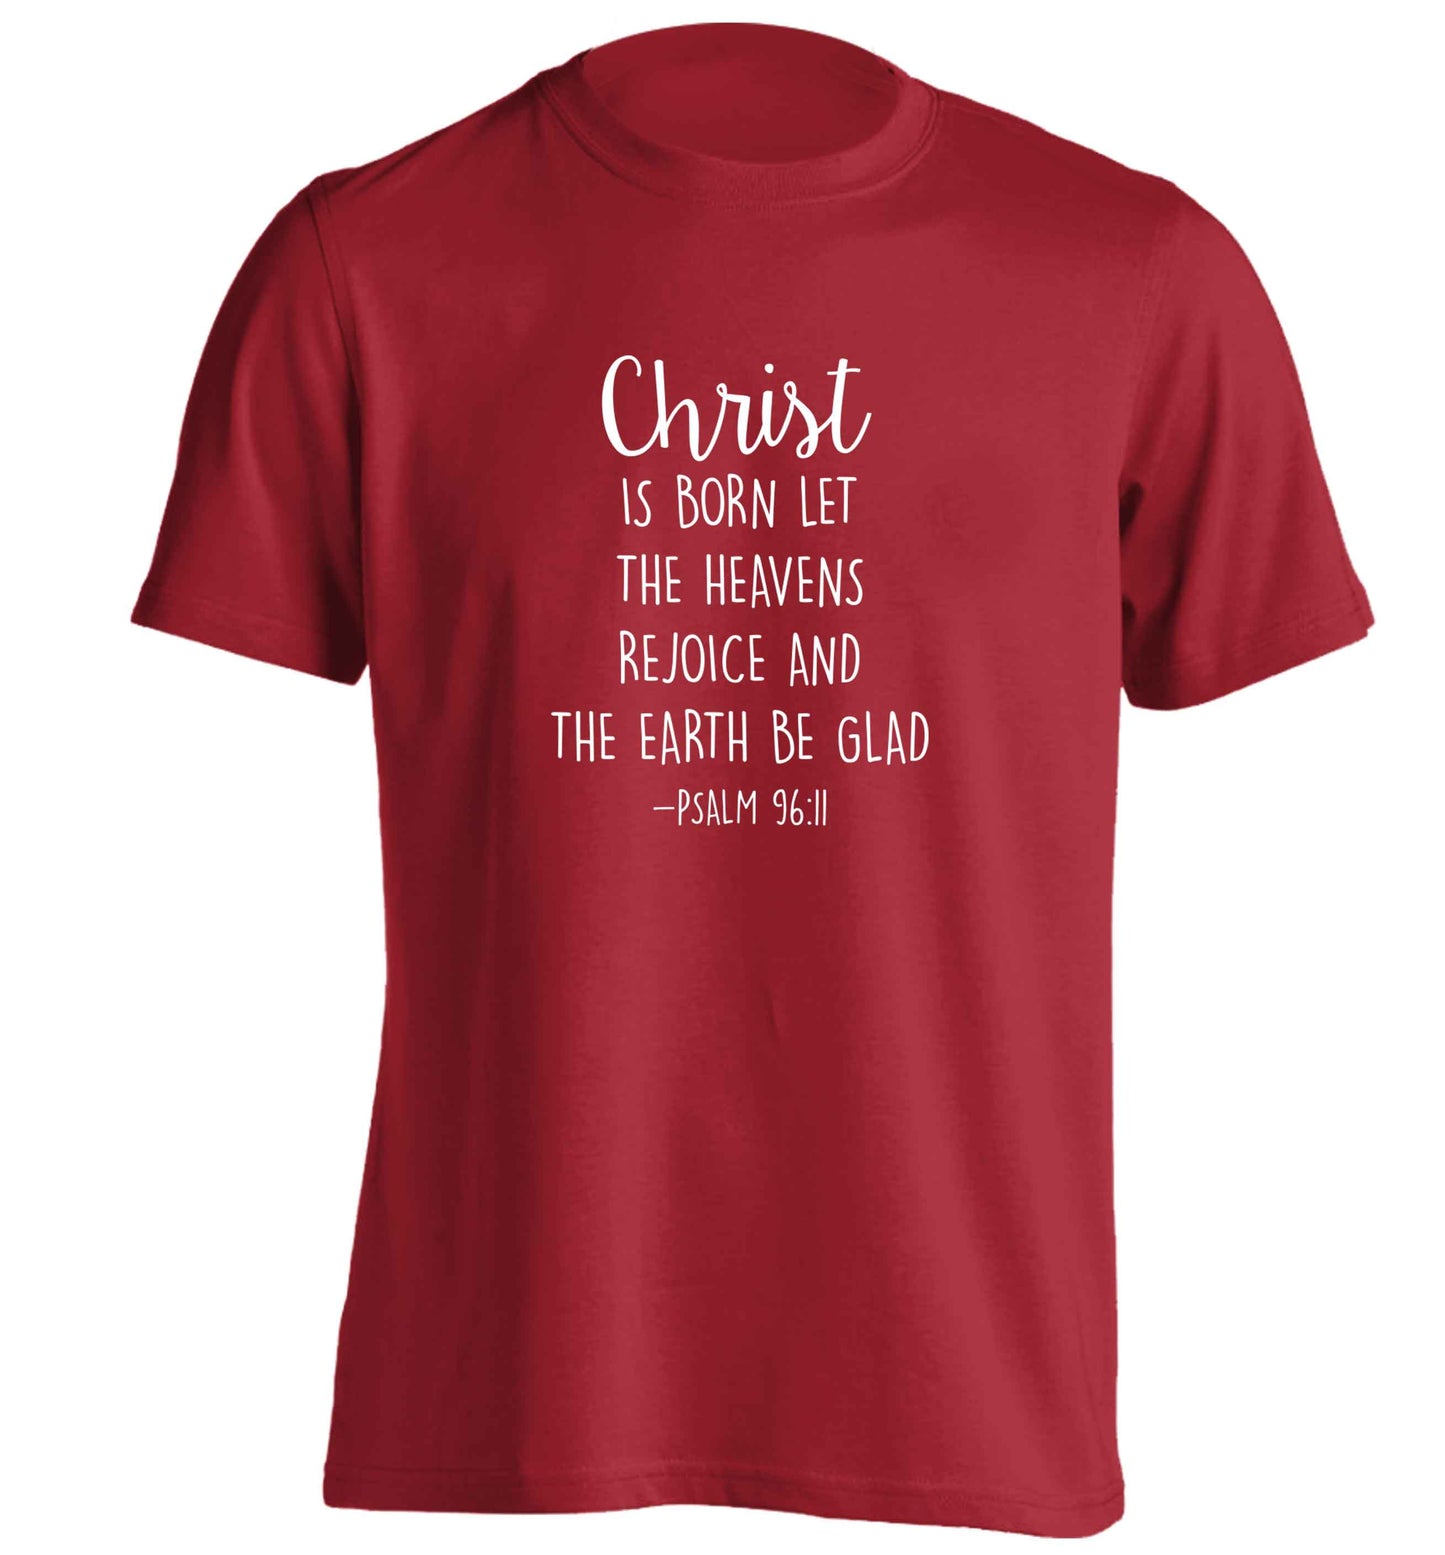 Christ is Born Psalm 96:11 adults unisex red Tshirt 2XL